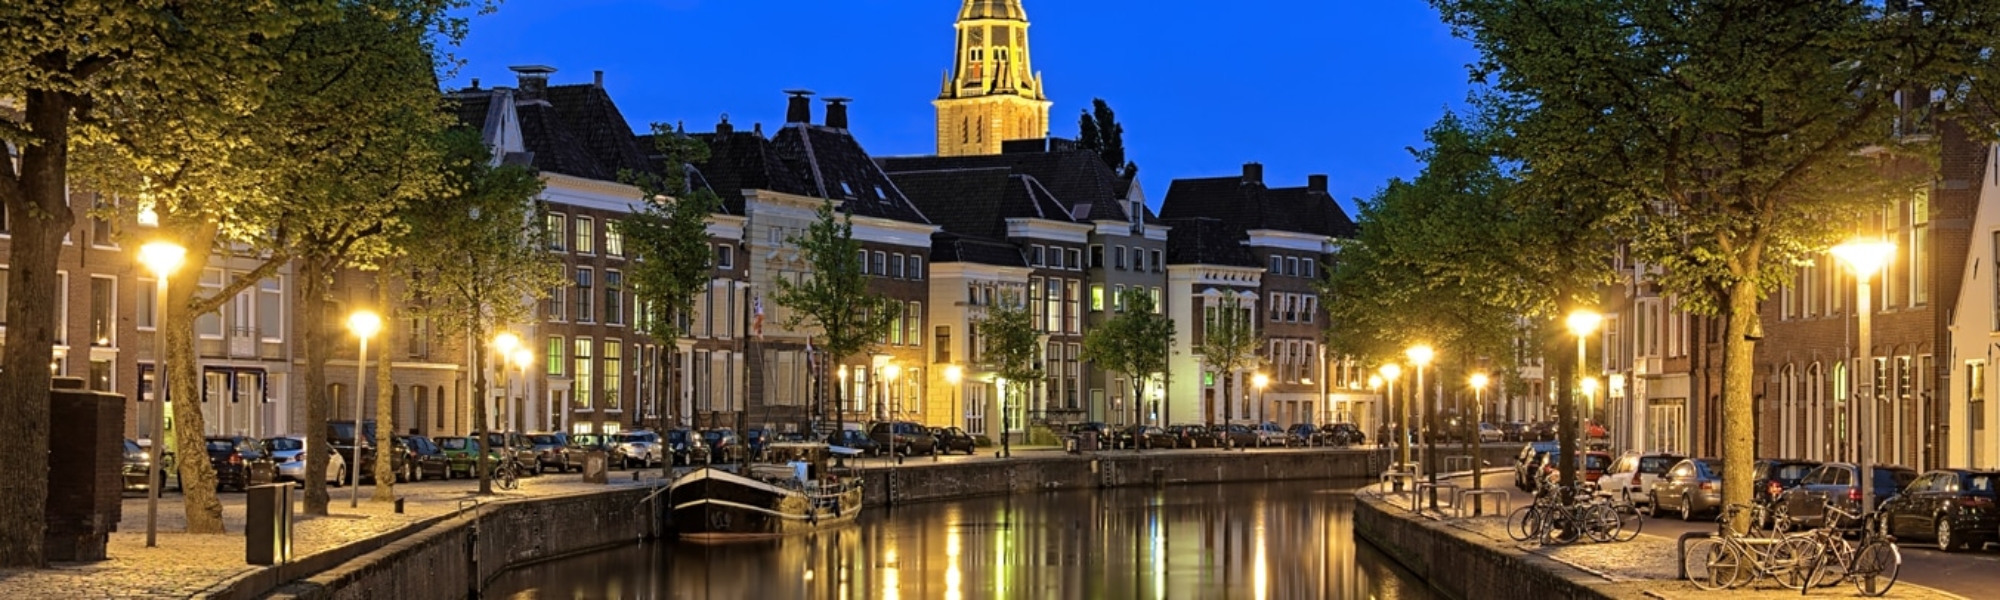 Evening view of Aa river with tower of  A-Church in Groningen, Netherlands